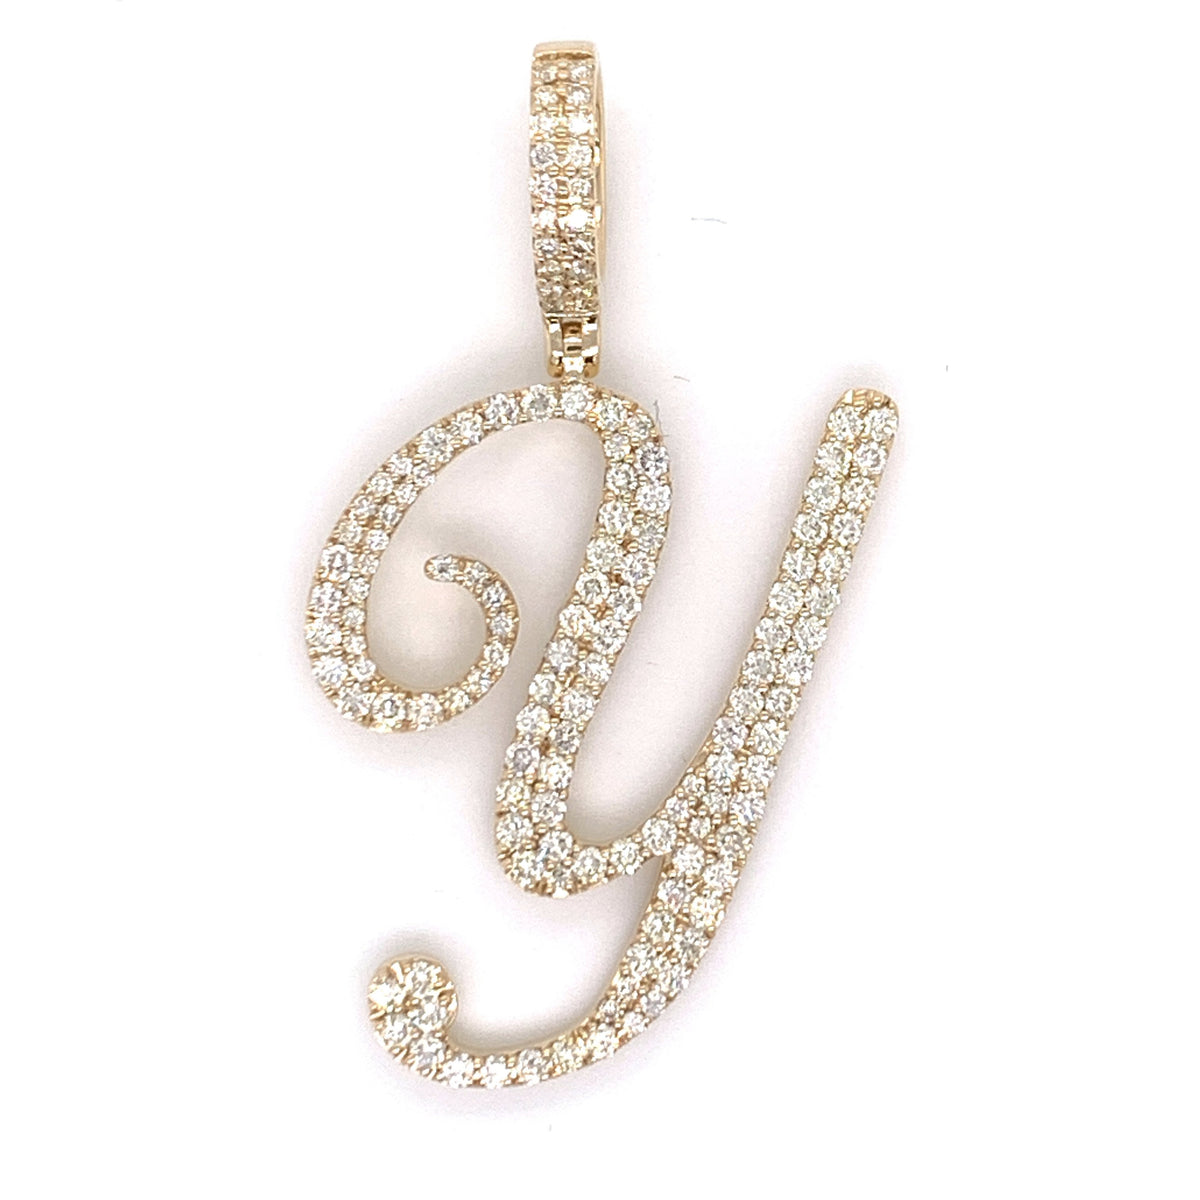 1.75 CT. Diamond Initial "Y" Pendant in Gold With Chain - White Carat Diamonds 